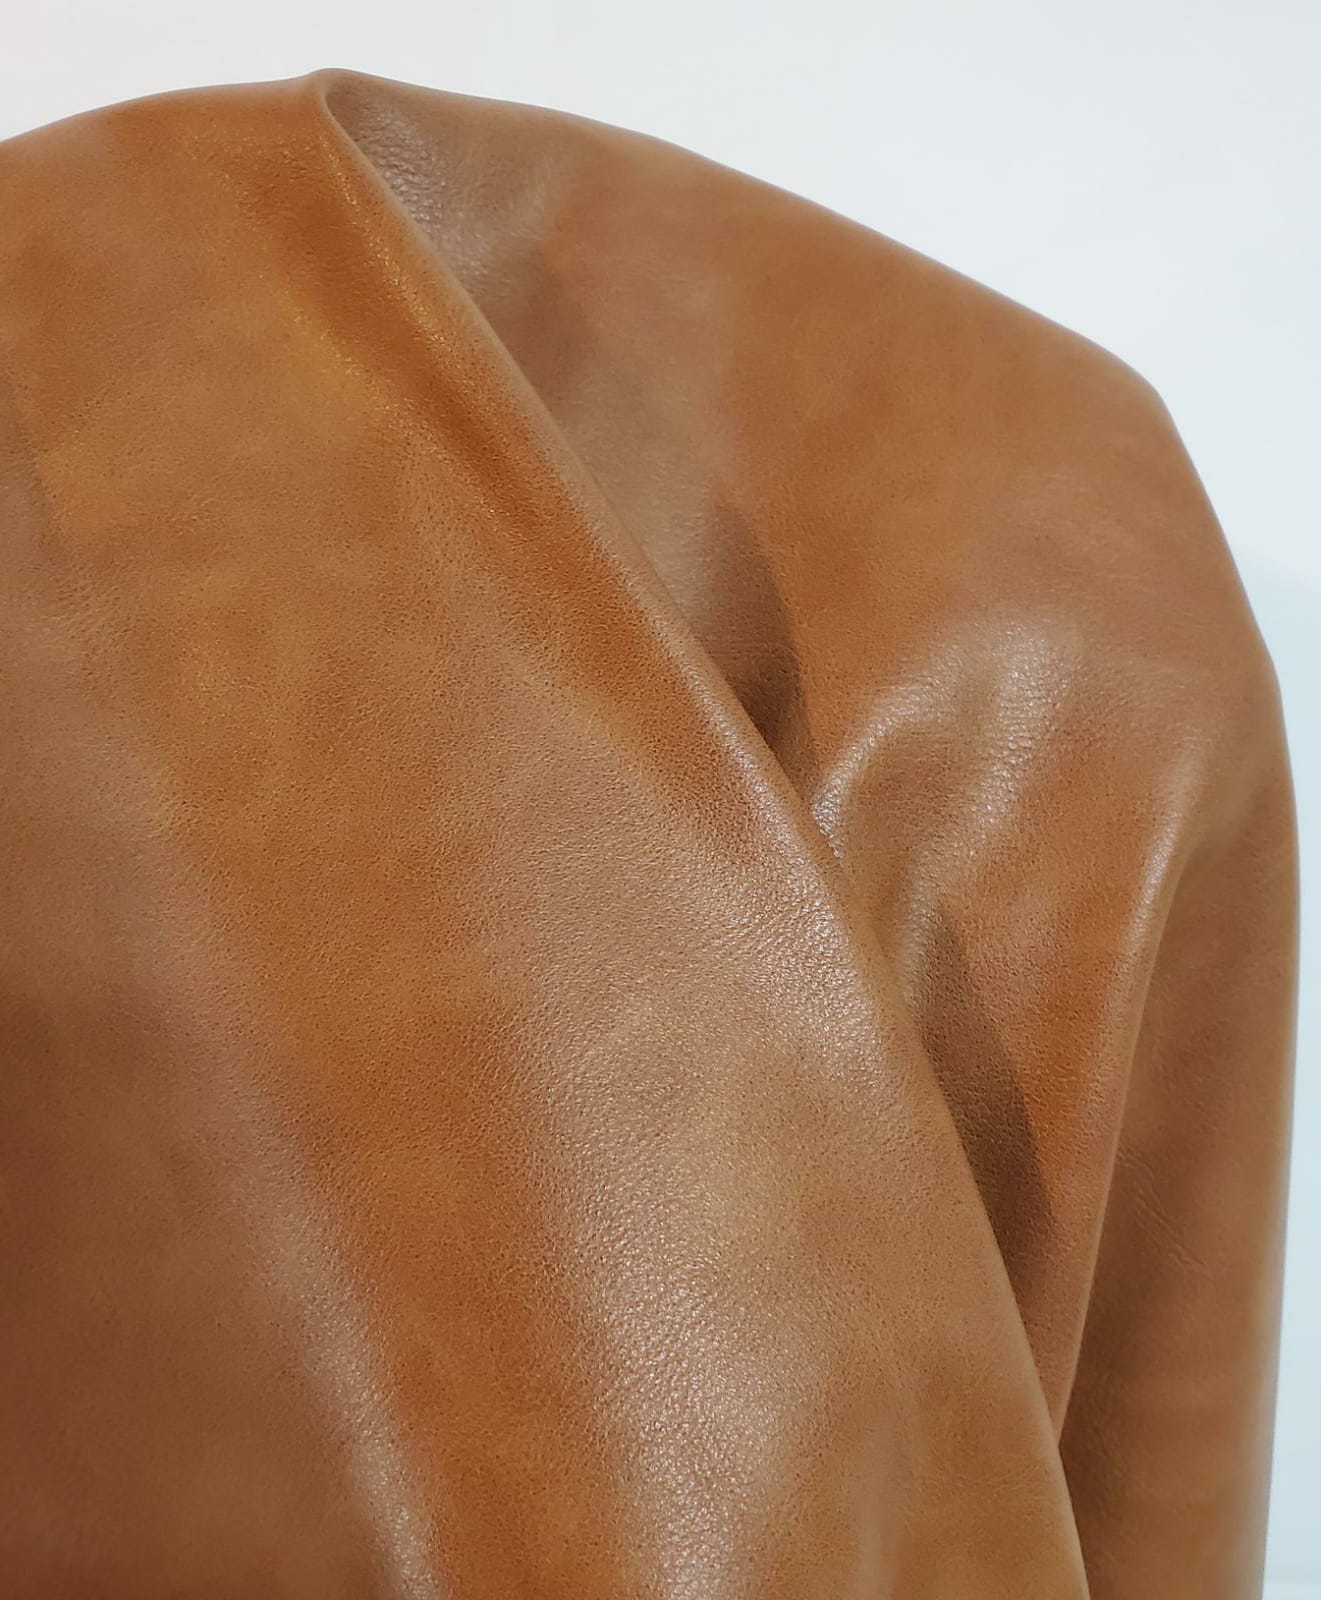  Faux vegan leather by the yard sheets distressed leather fabric for upholstery 30,000 Double Rubs vinyl sheets nappa leather crafts bookbinding books furniture fabrics uphilstery fuax material pu pleather faiux learher cruelty free nappa seat British tan brown